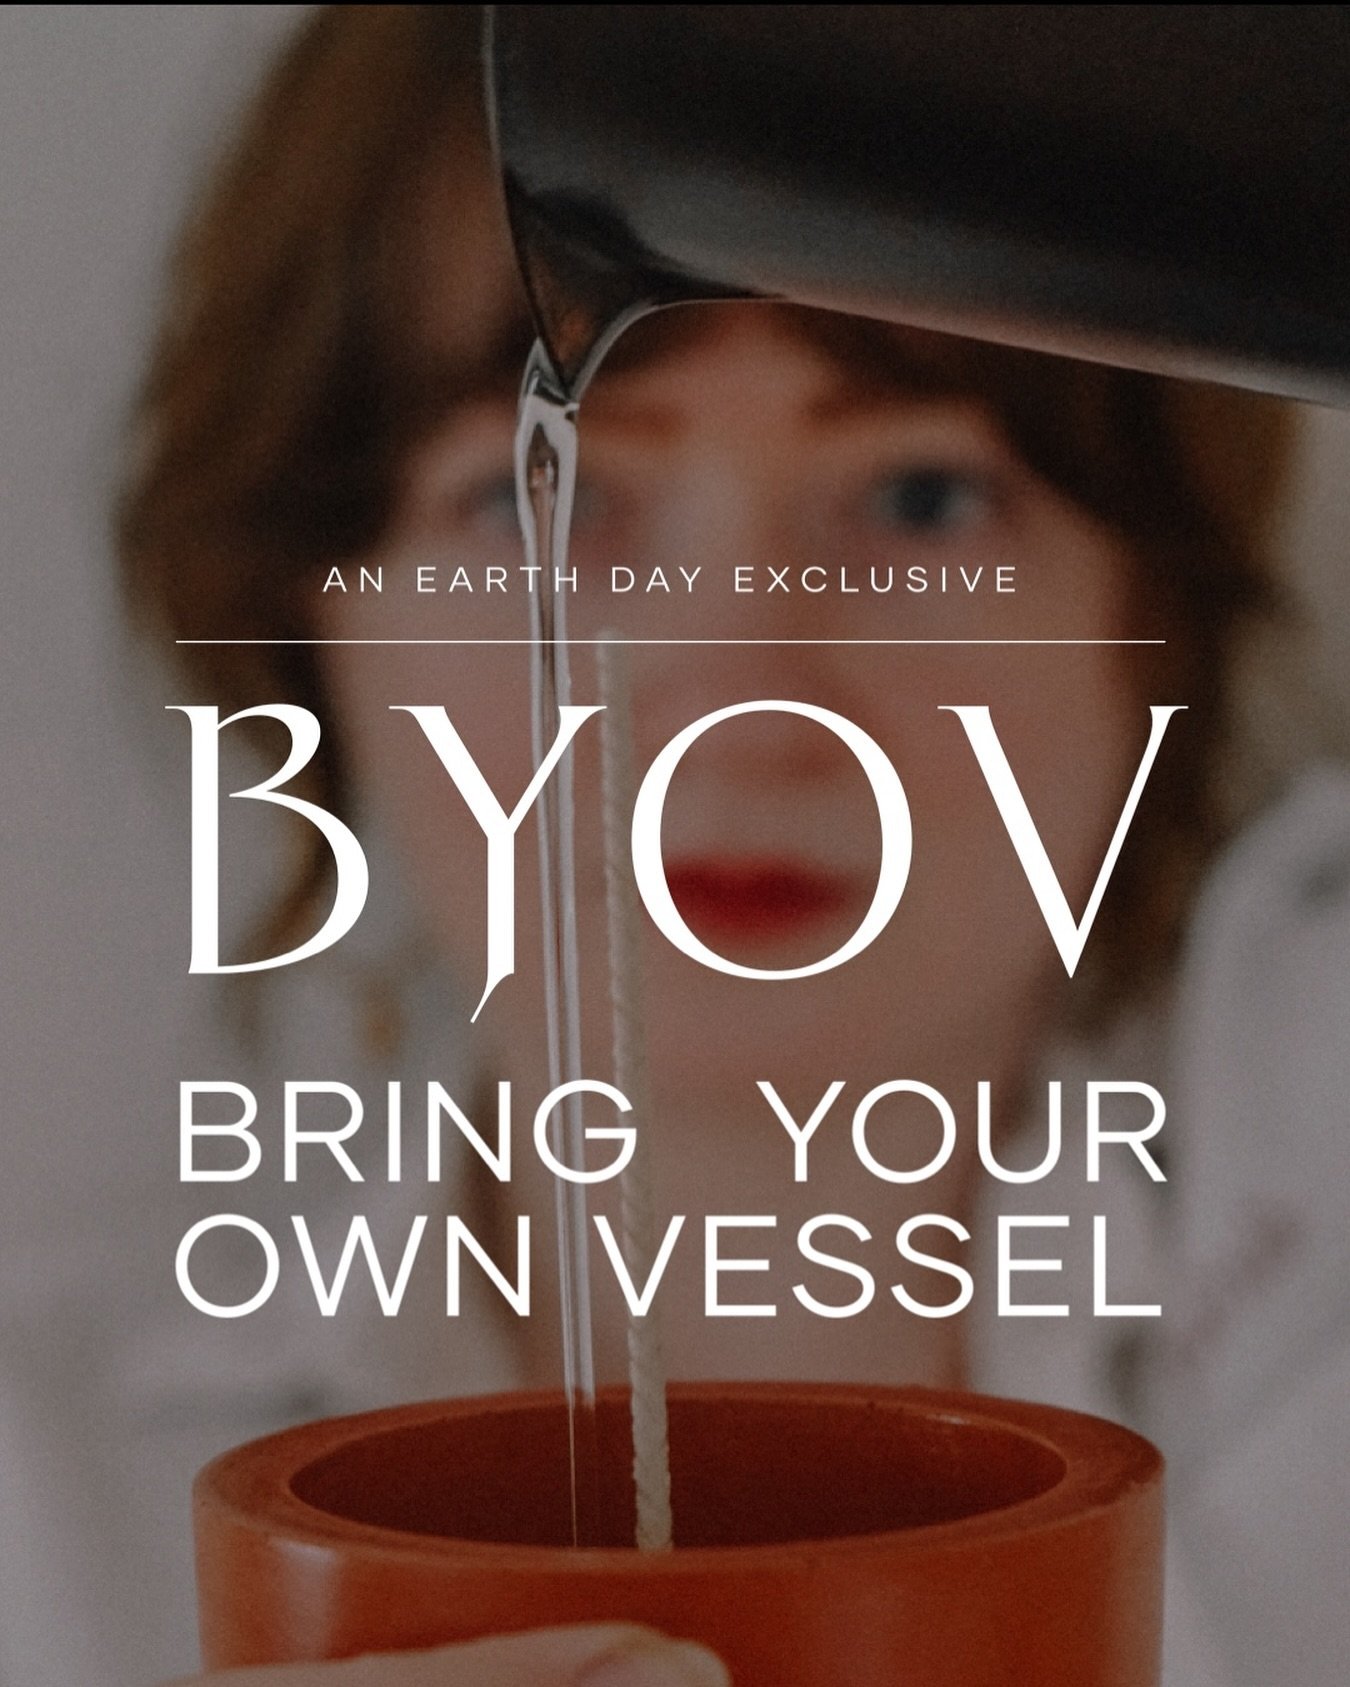 BYOV (Bring Your Own Vessel)

AN EARTH DAY EXCLUSIVE 
have old candle jars or ceramics sitting around? bring your own tempered glass jars and food-grade glazed ceramic vessels to this sunday&rsquo;s @providenceflea (April 21) or the @shop.wickenden m